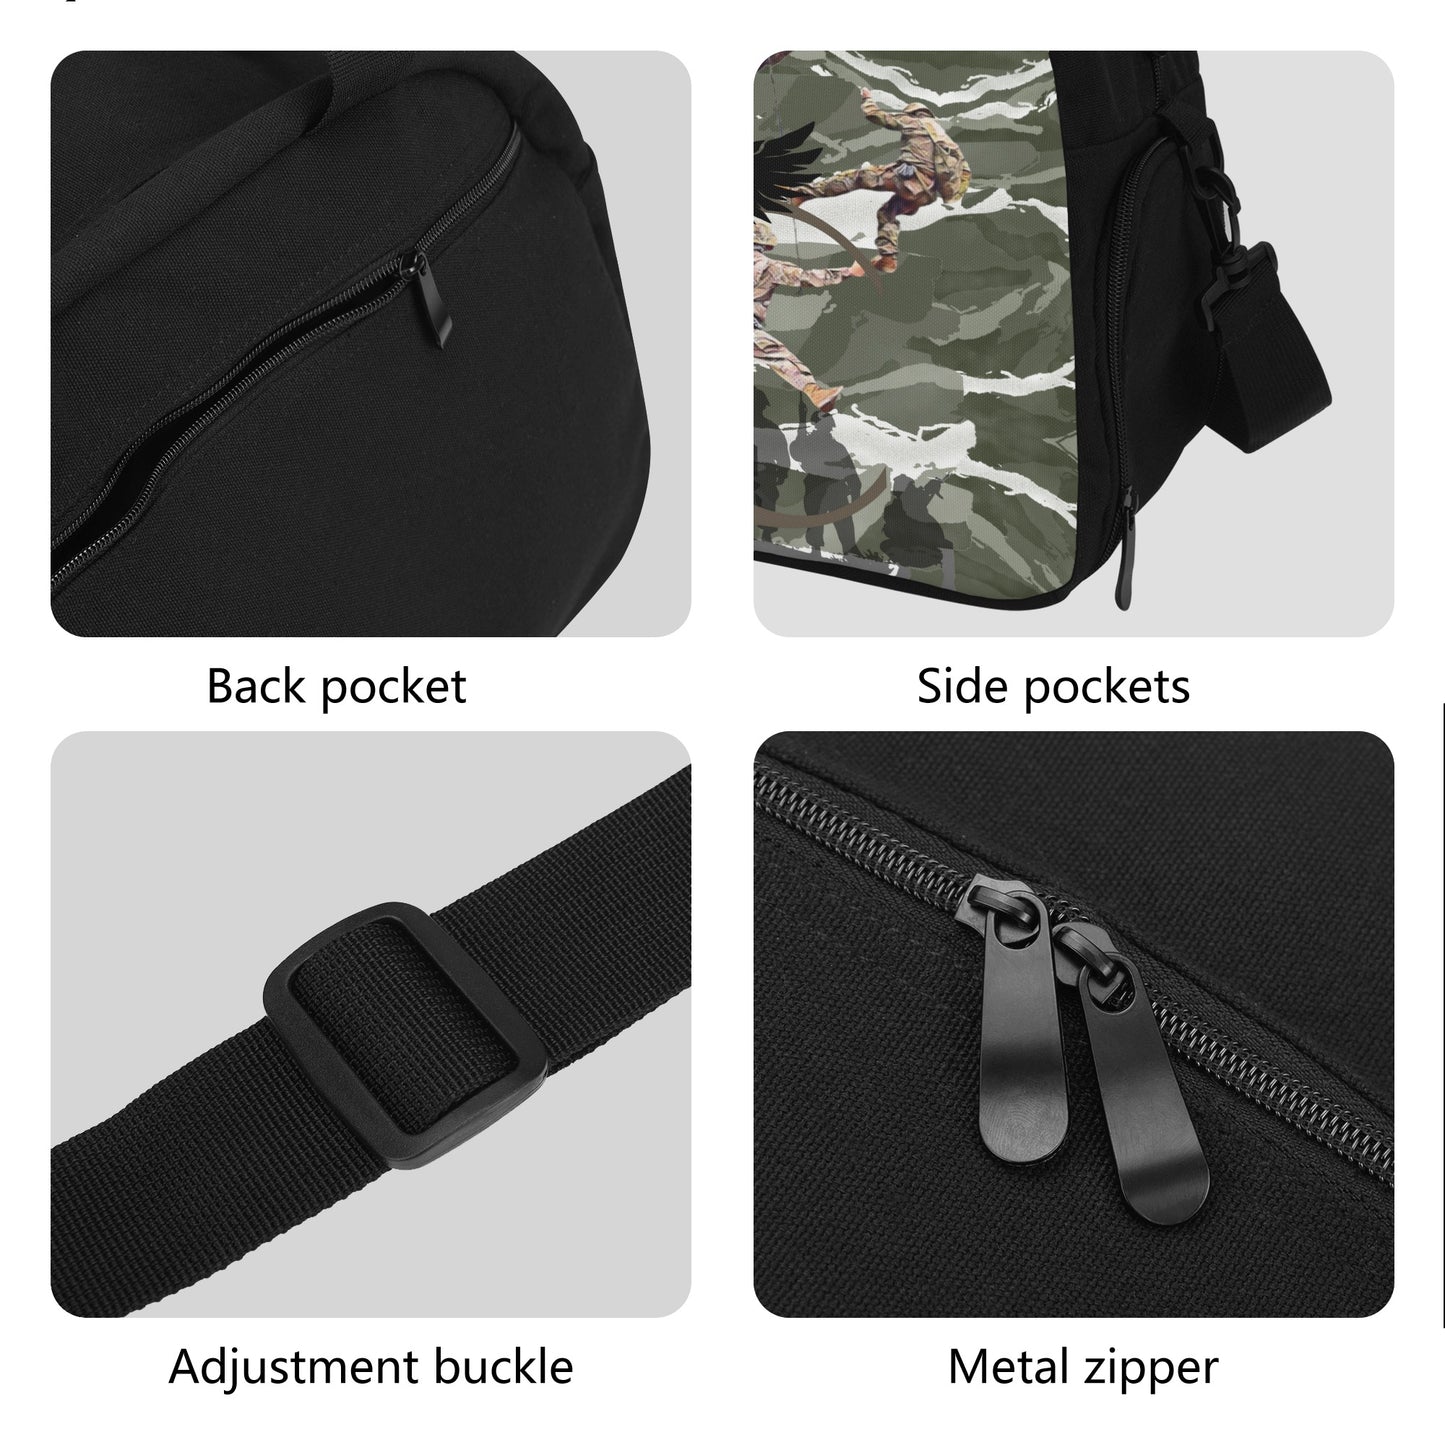 Expedition Ready Travel Bag